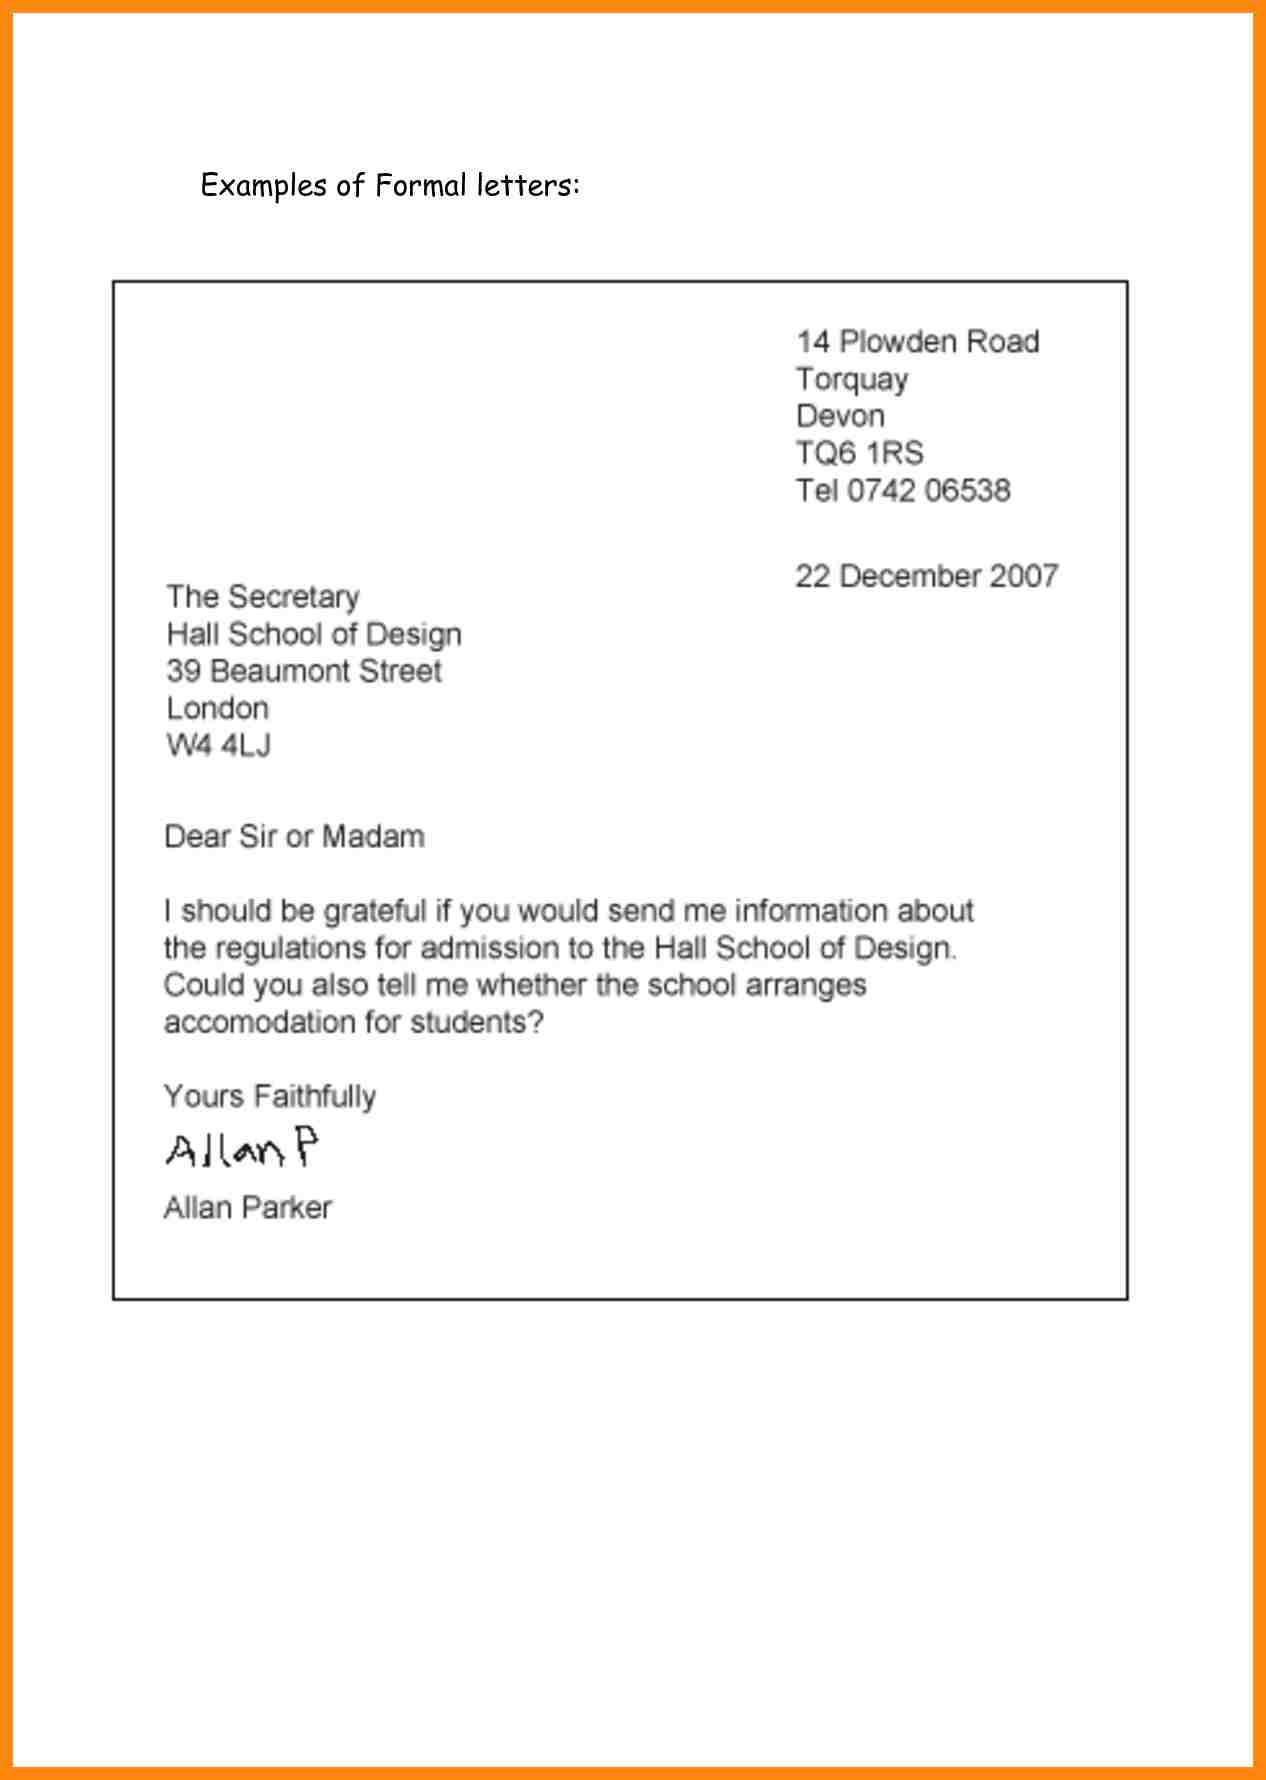 4+ formal letters examples for students | manager resume